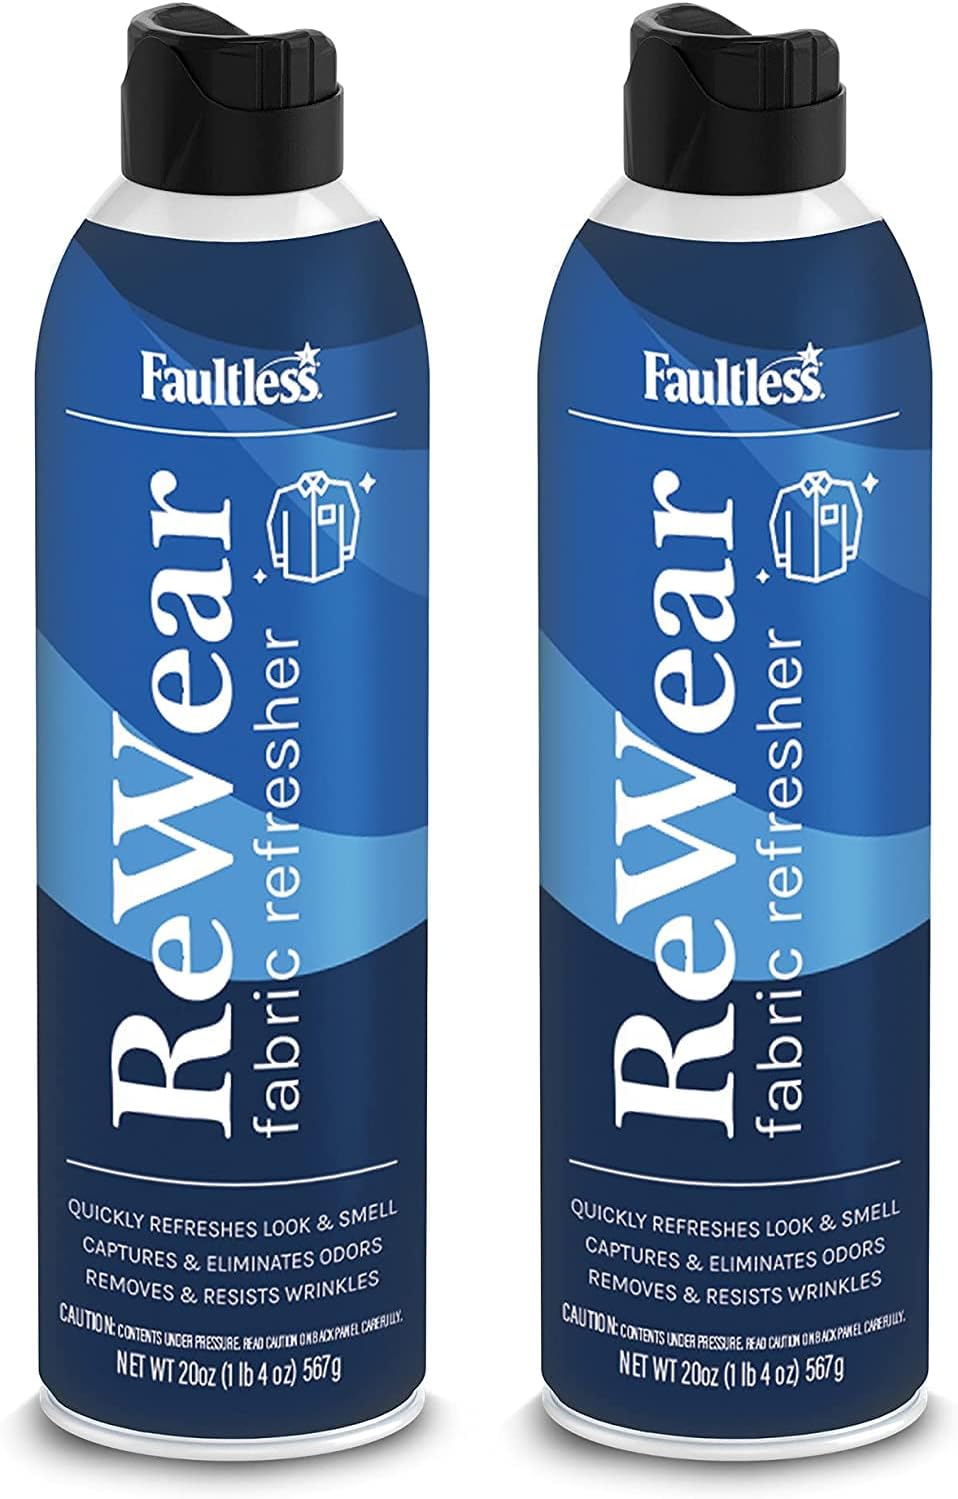 Faultless ReWear Dry Wash Spray for Clothing – Wrinkle Remover, Fabric Refresher Spray, Captures Odors – Like Dry Shampoo for Clothes: Fresh Look W/Out Laundry, 20oz 2 Pack